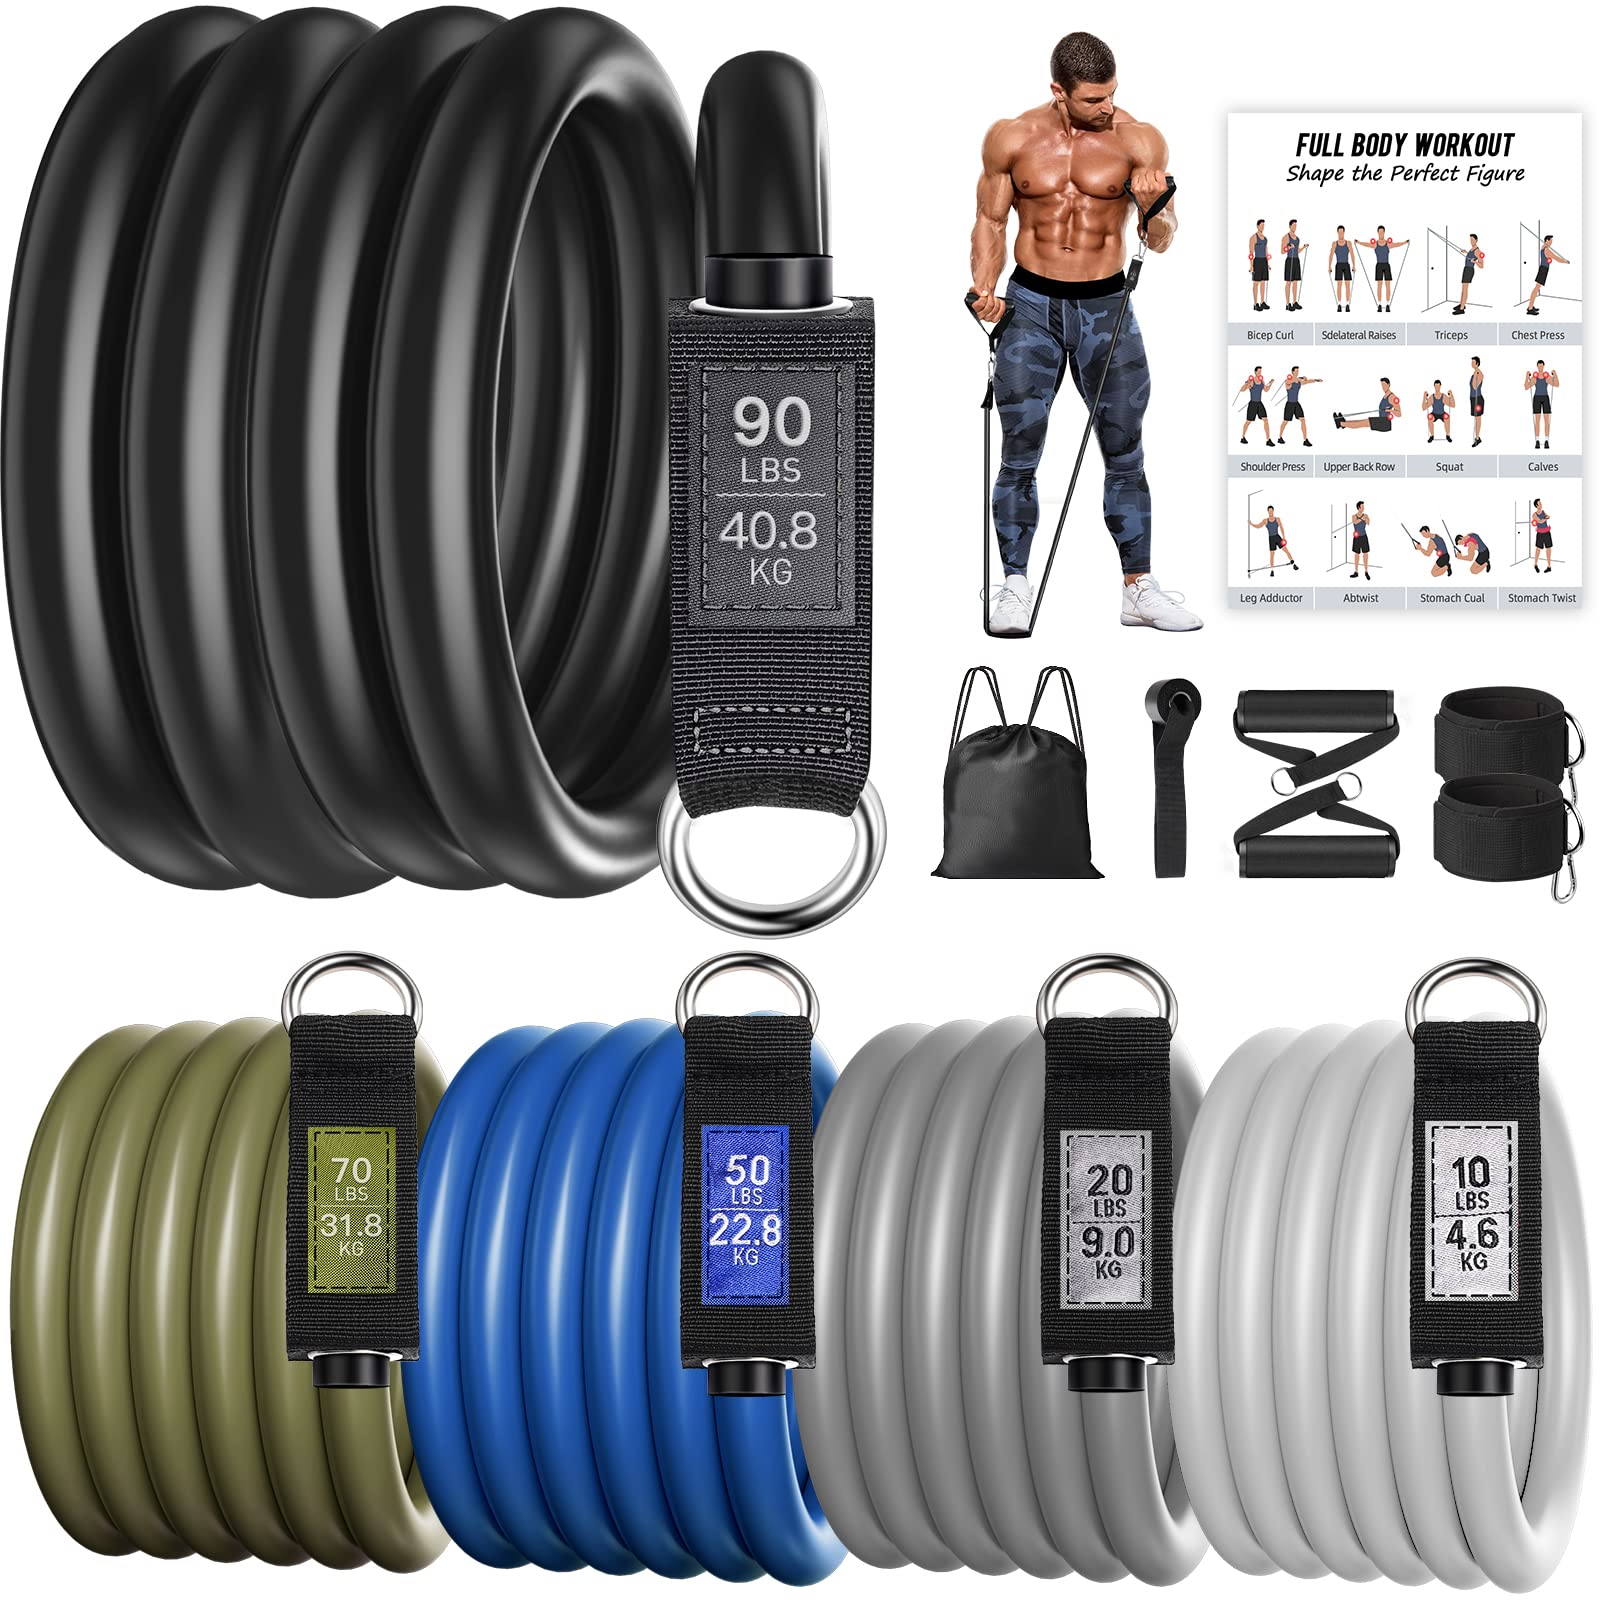 NITEEN 240lbs Heavy Resistance Bands for Working Out, India